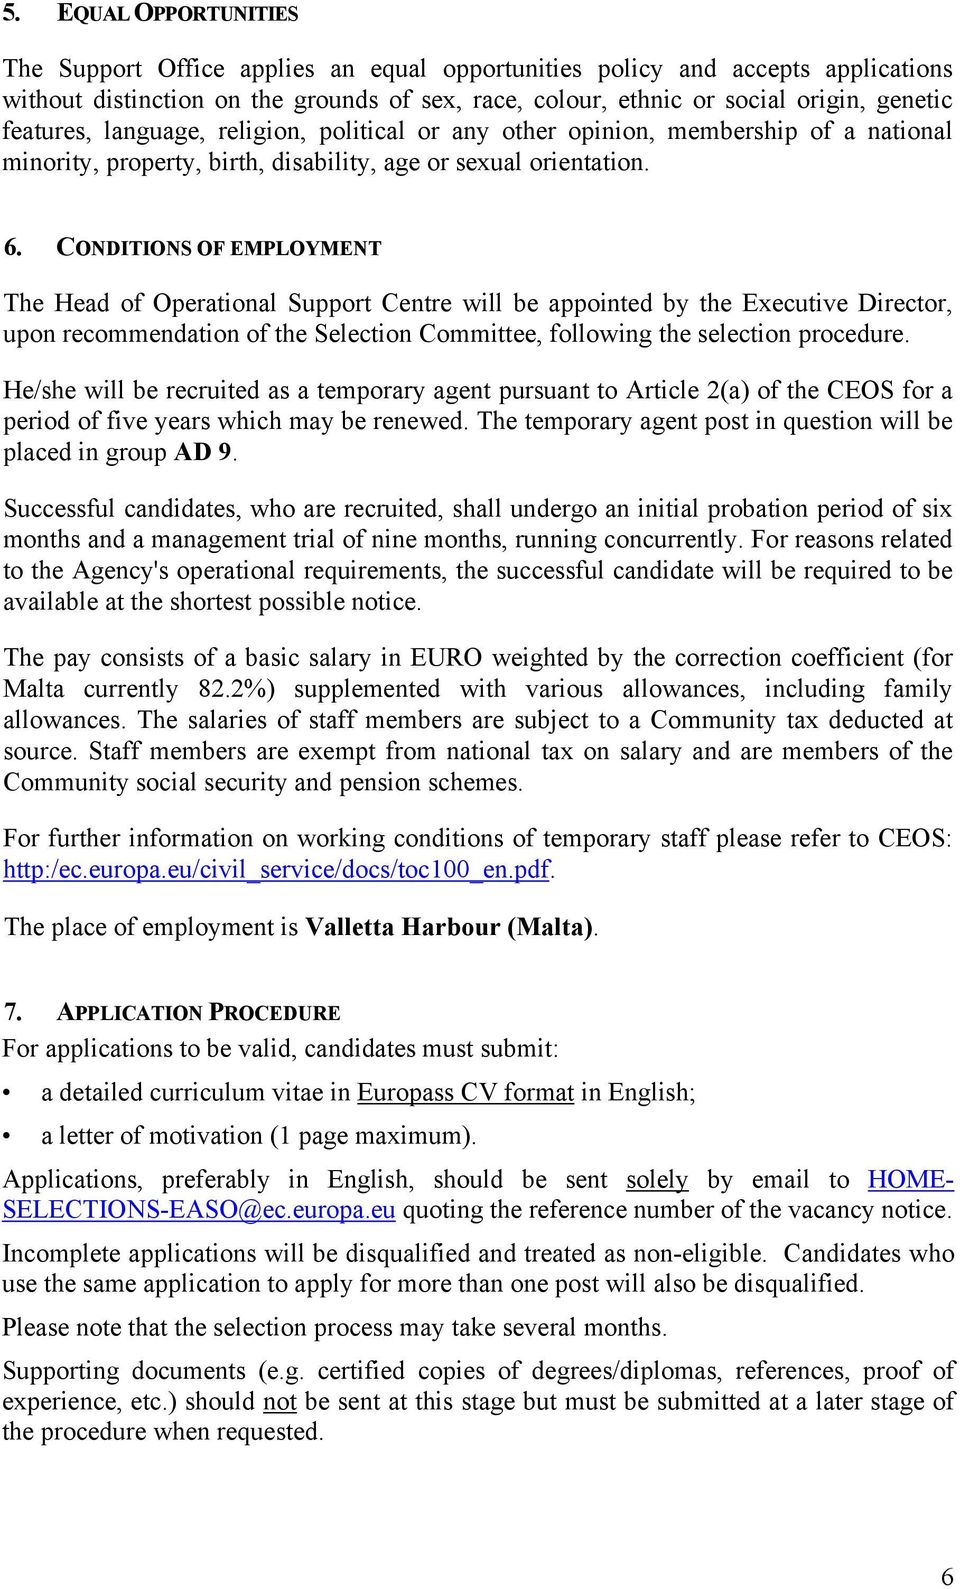 CONDITIONS OF EMPLOYMENT The Head of Operational Support Centre will be appointed by the Executive Director, upon recommendation of the Selection Committee, following the selection procedure.